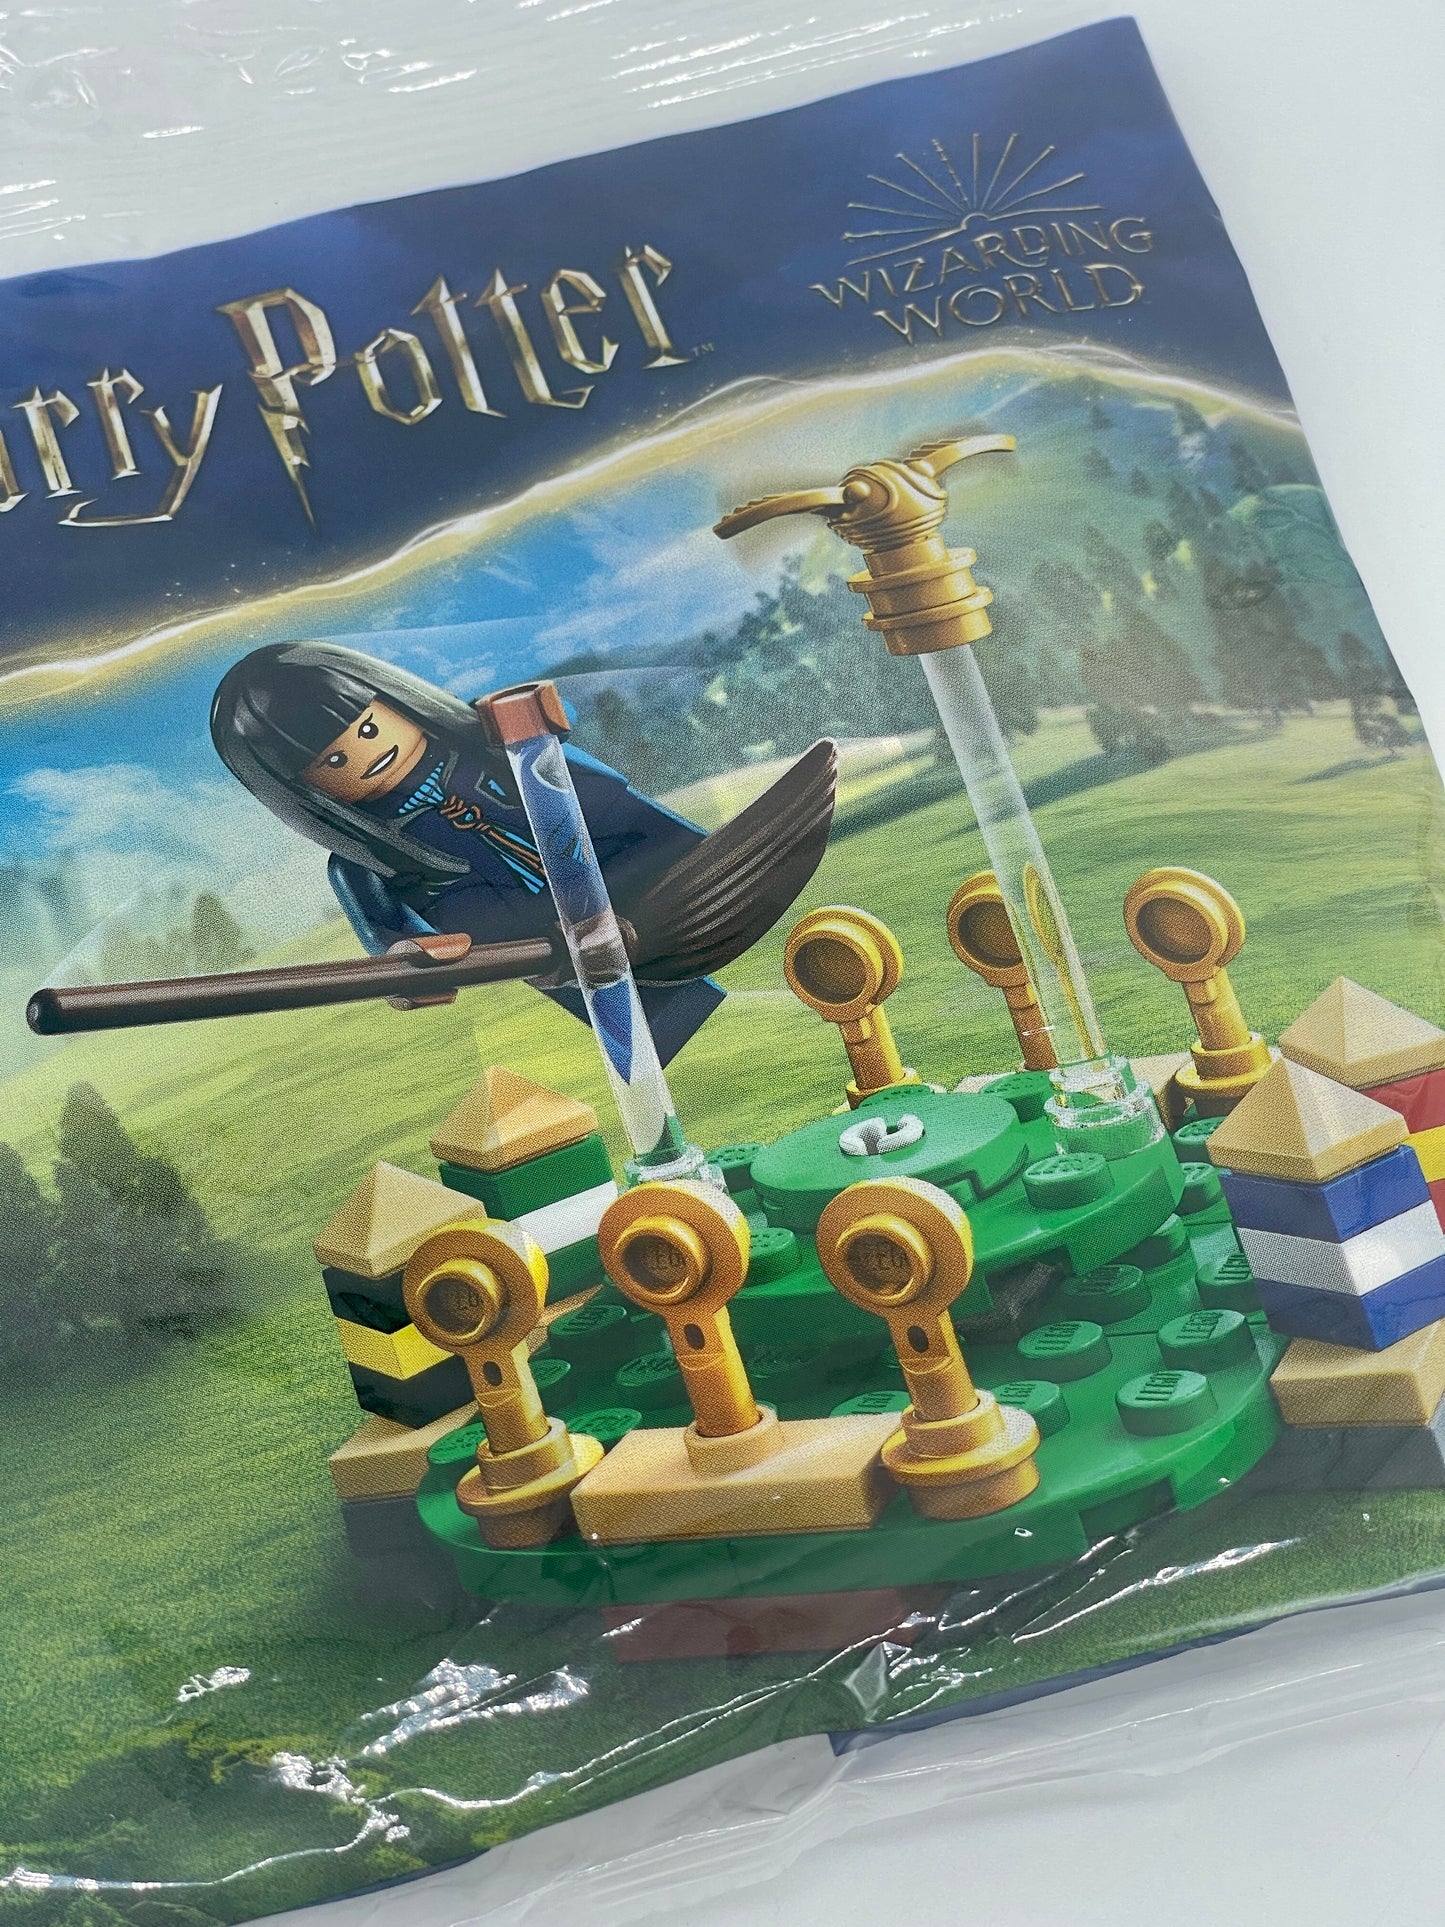 Lego Harry Potter "Quidditch Training" Polybag 30651 US Version